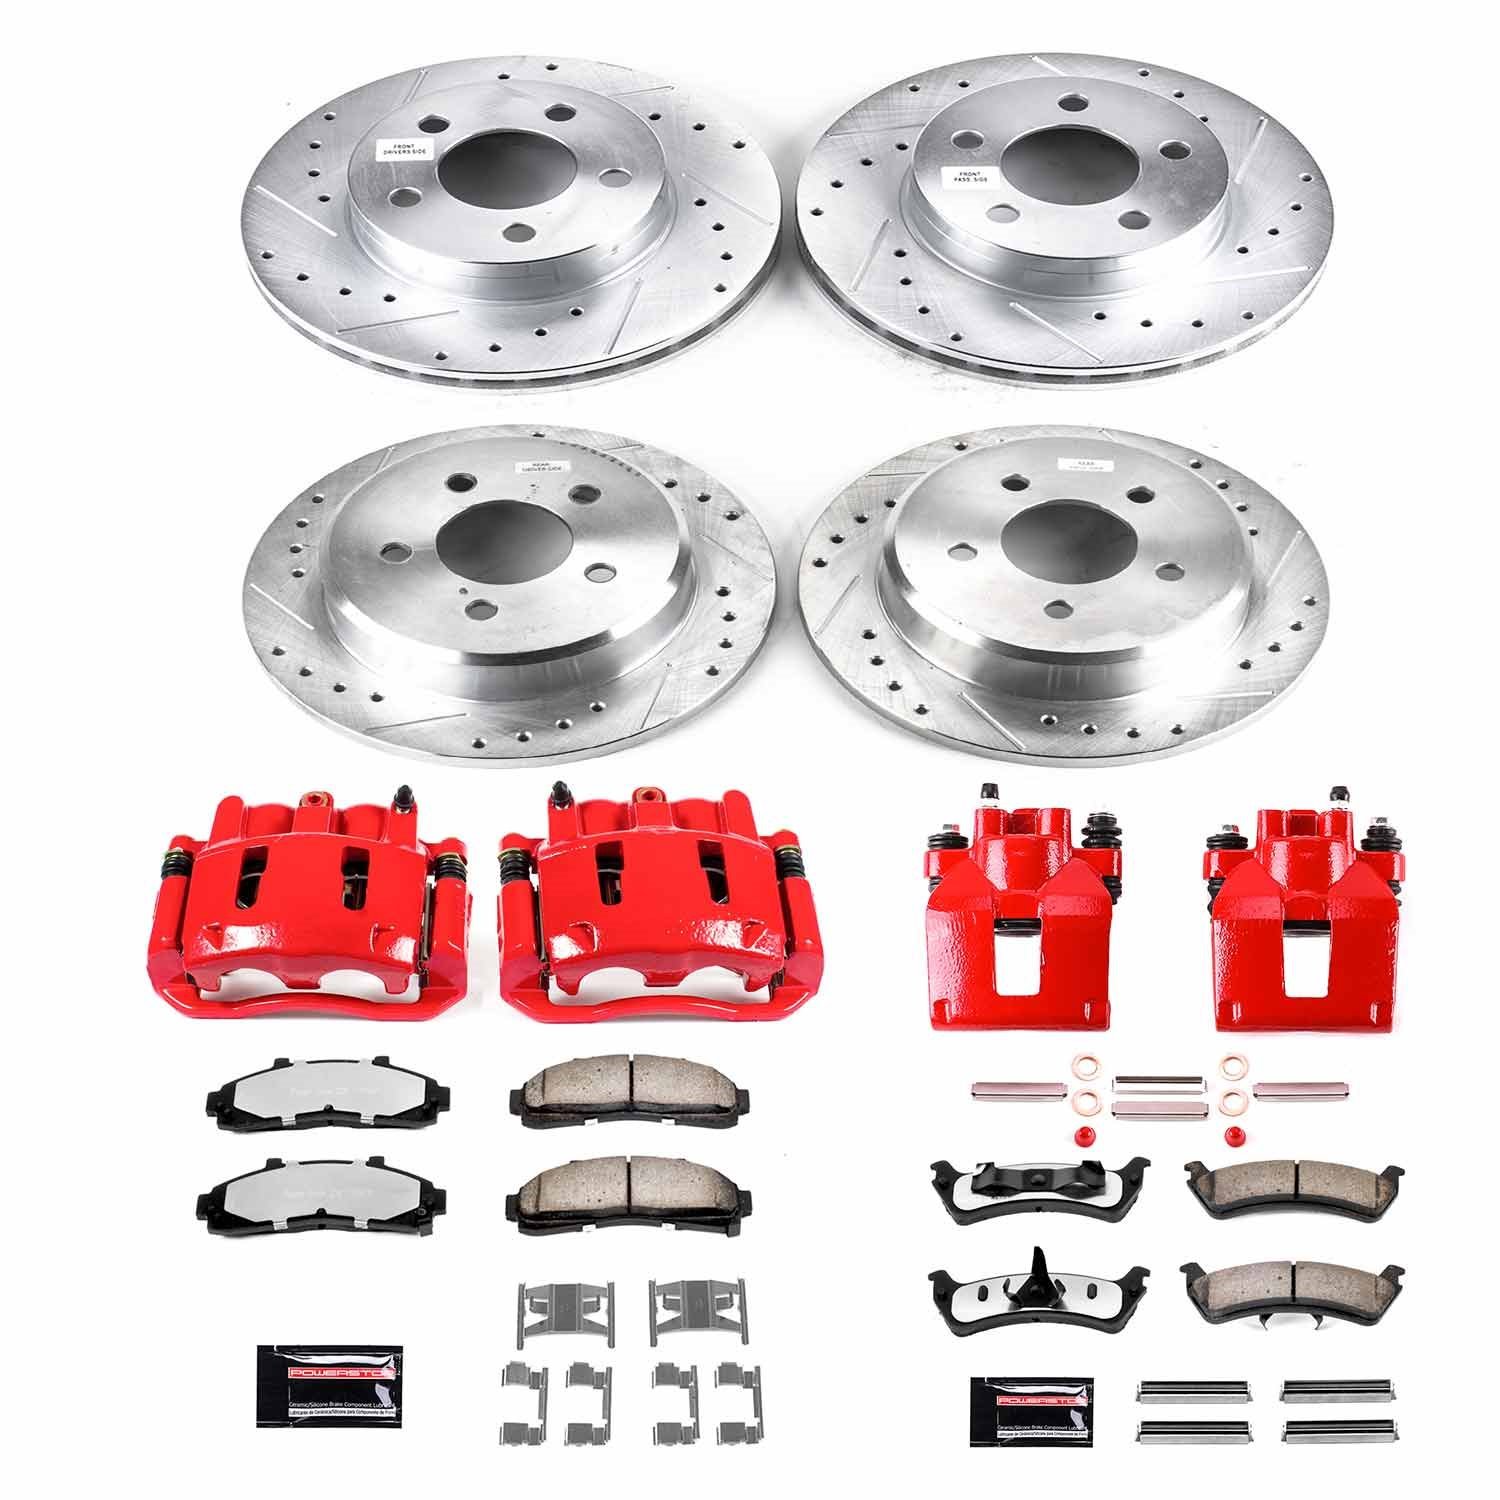 Truck and Tow Z36 Front/Rear Brake Pad, Rotor